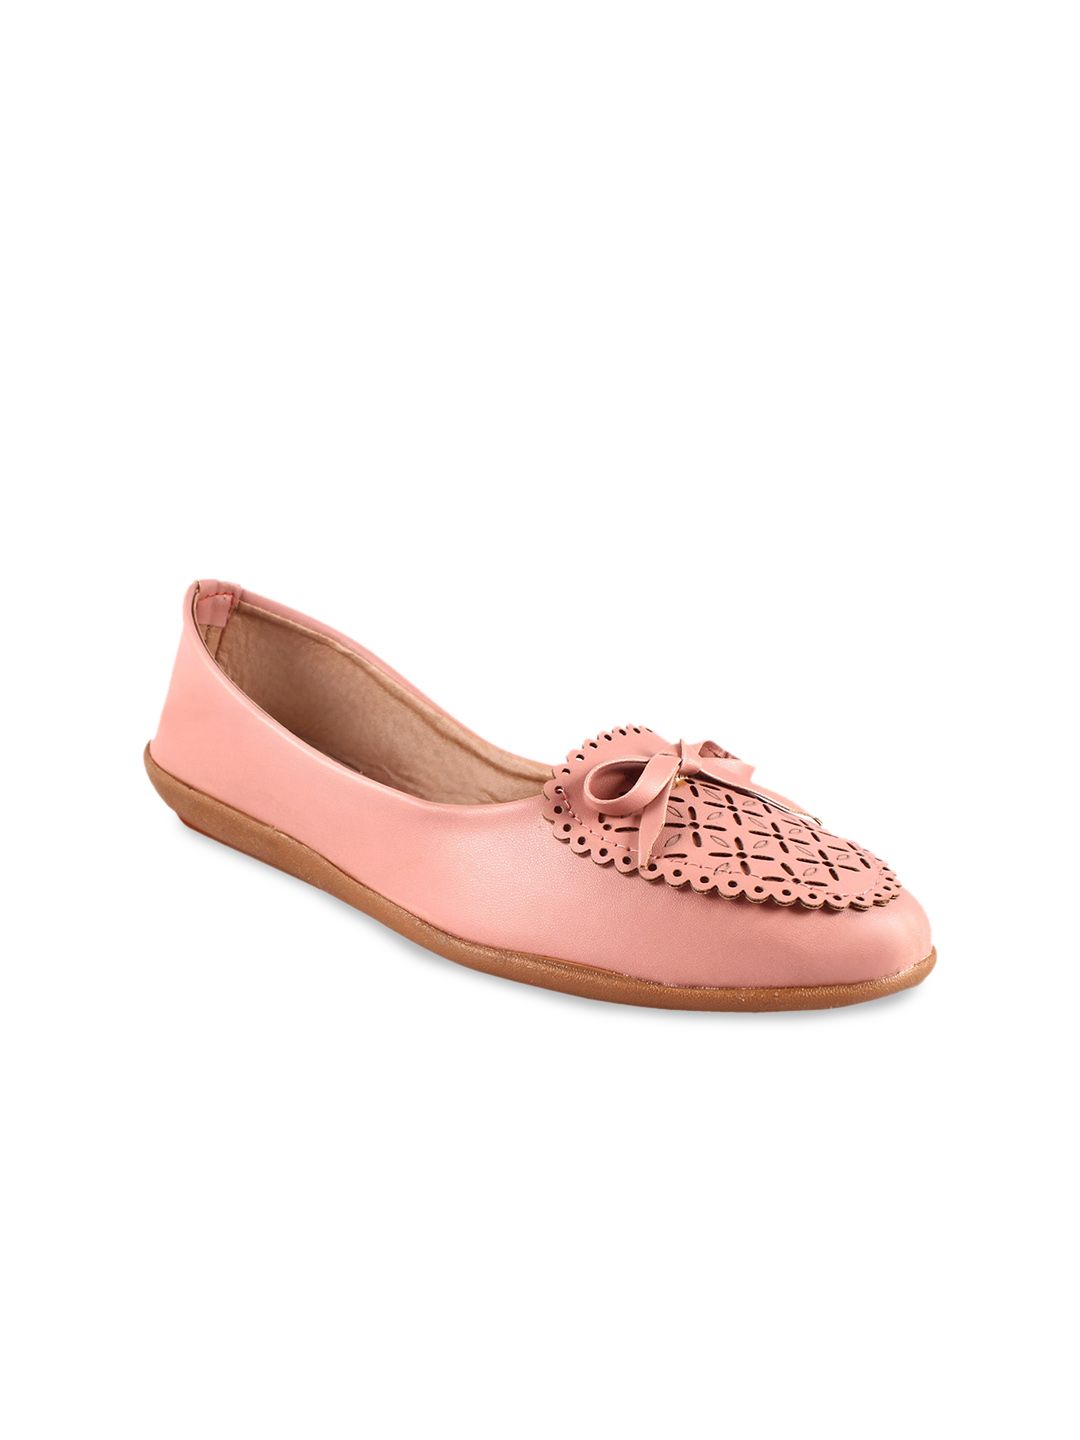 Apratim Women Rose Gold Party Ballerinas with Bows Flats Price in India